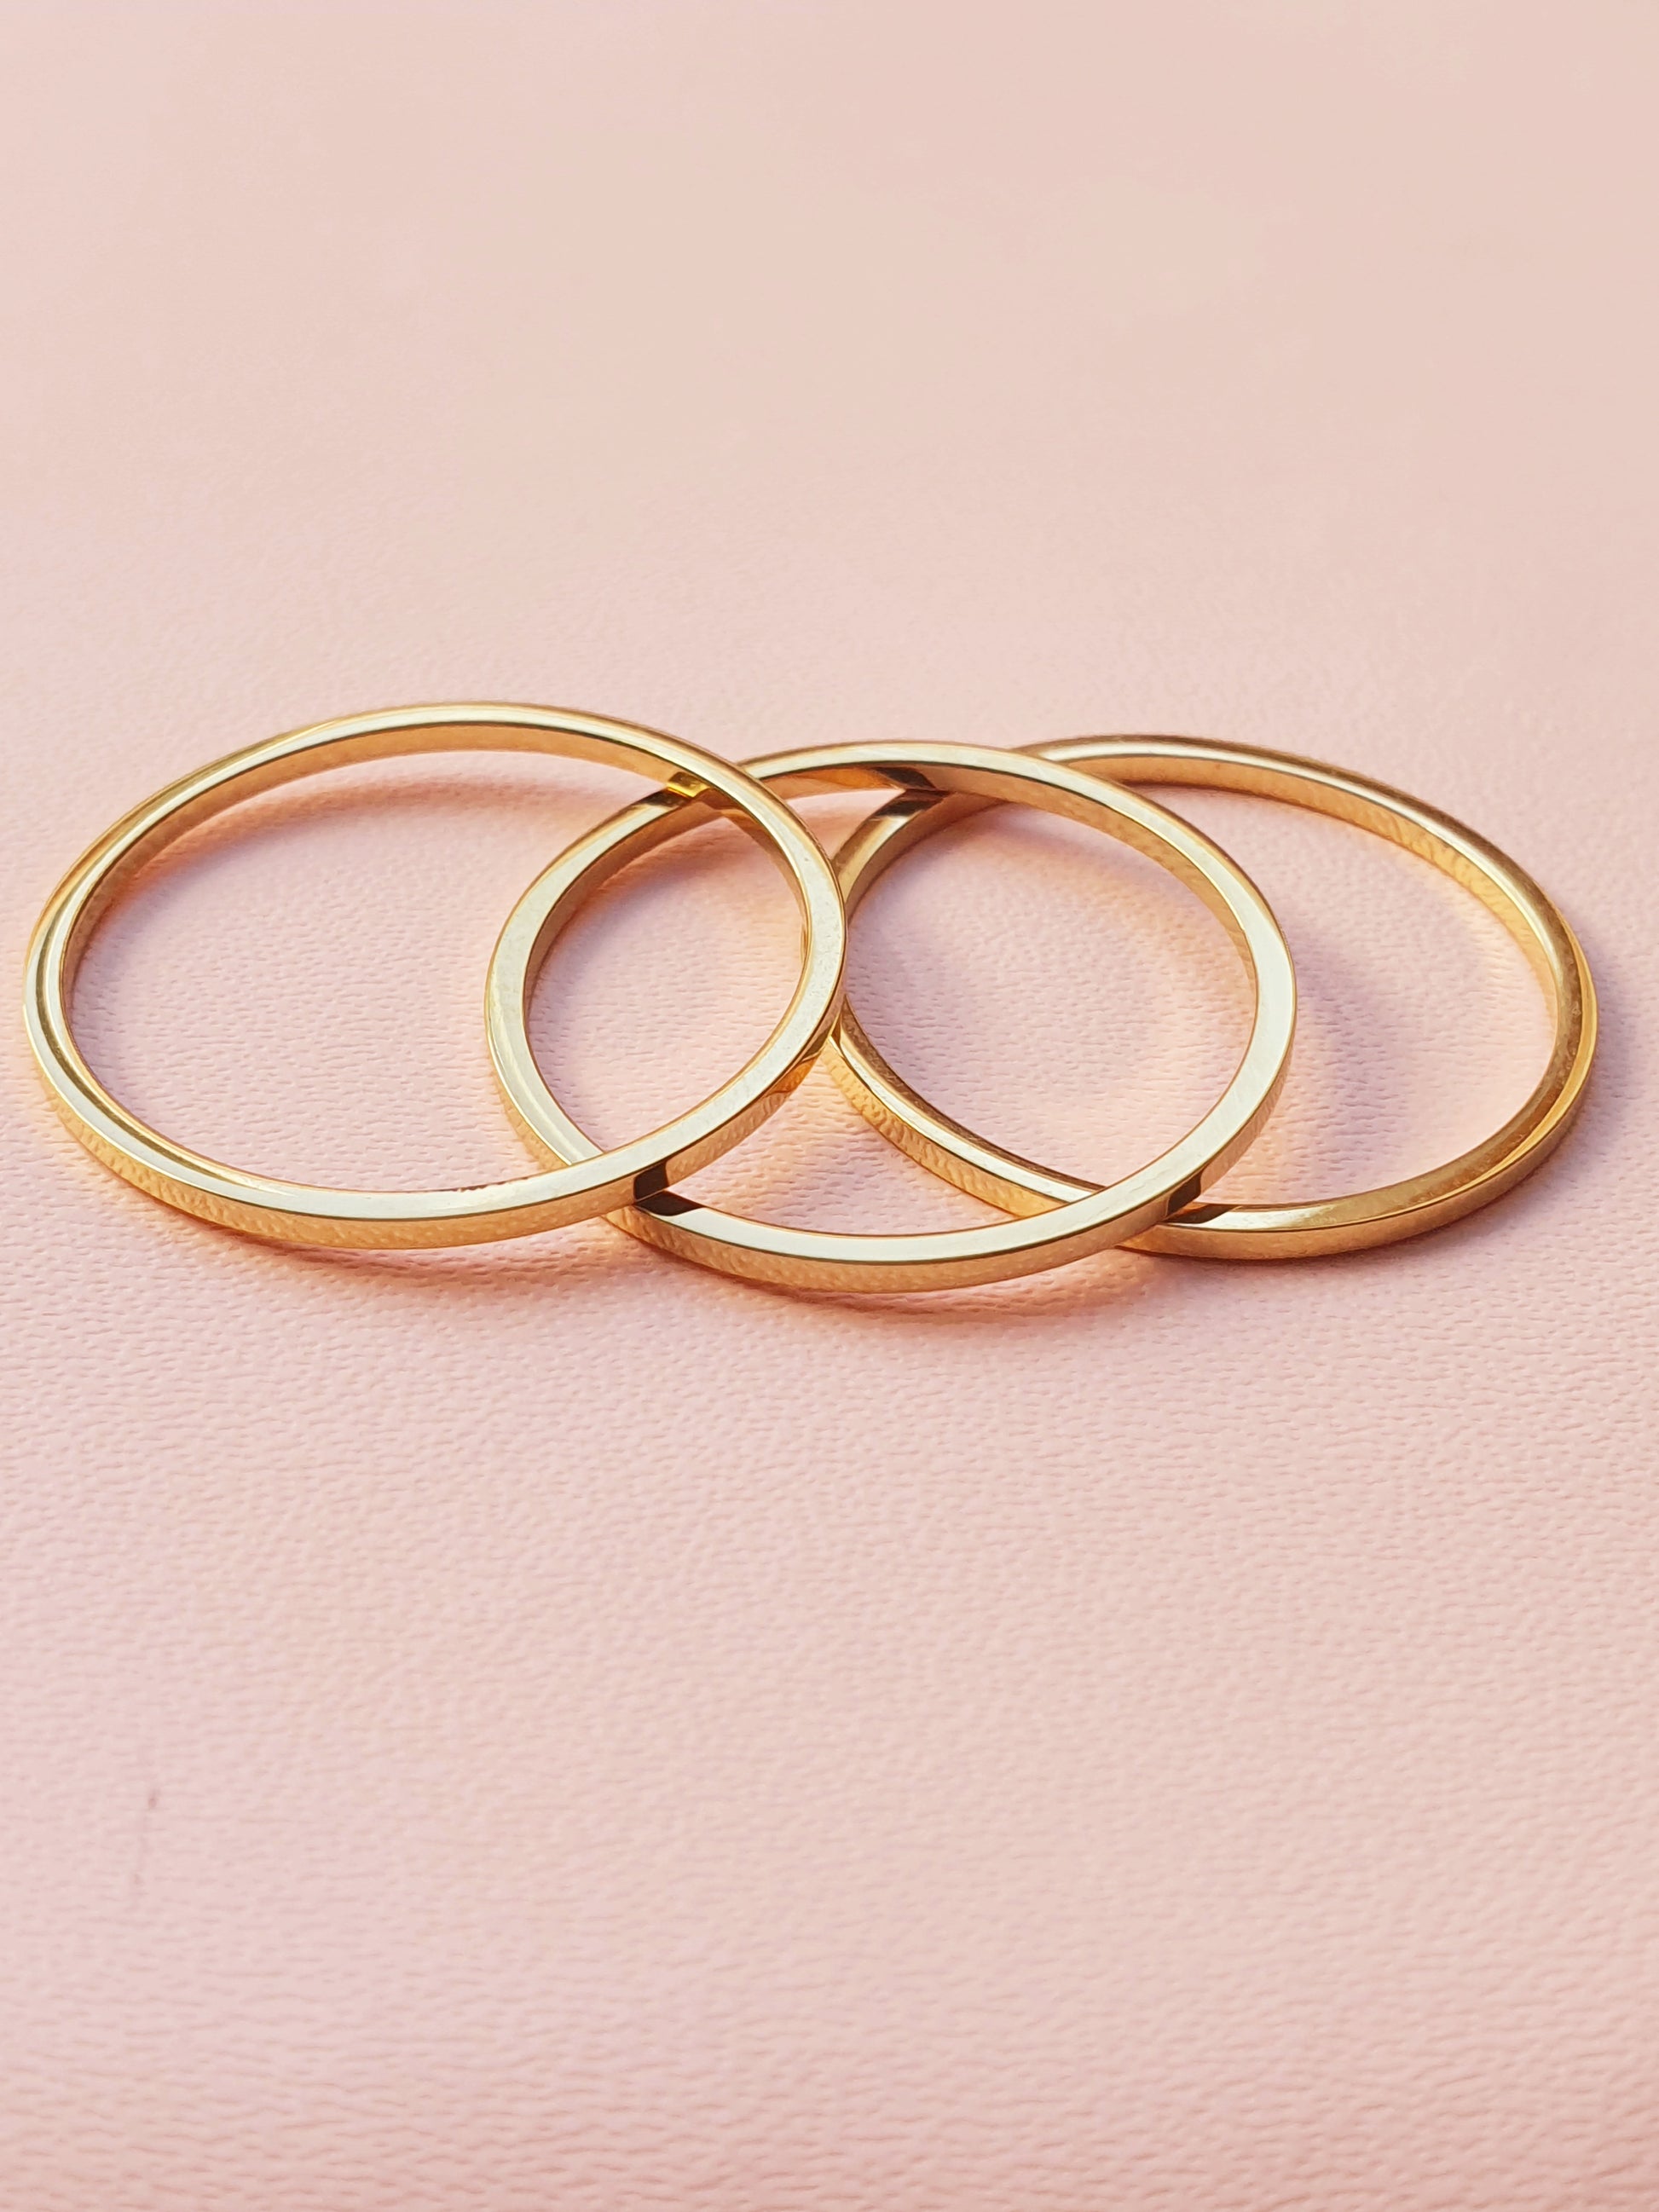 Three slim gold stacking rings placed on top of each other